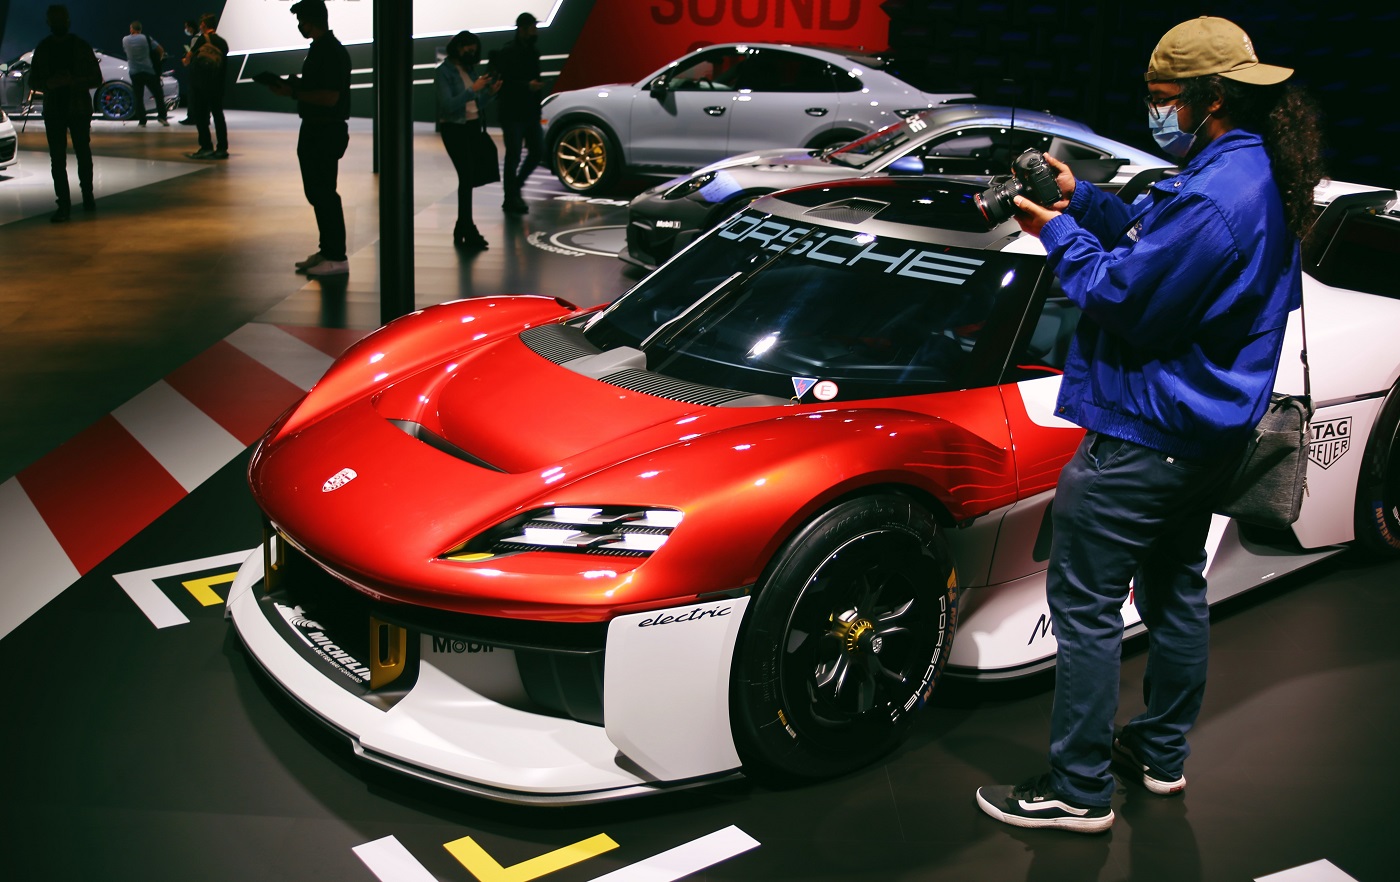 The Best Things To See at the 2021 LA Auto Show